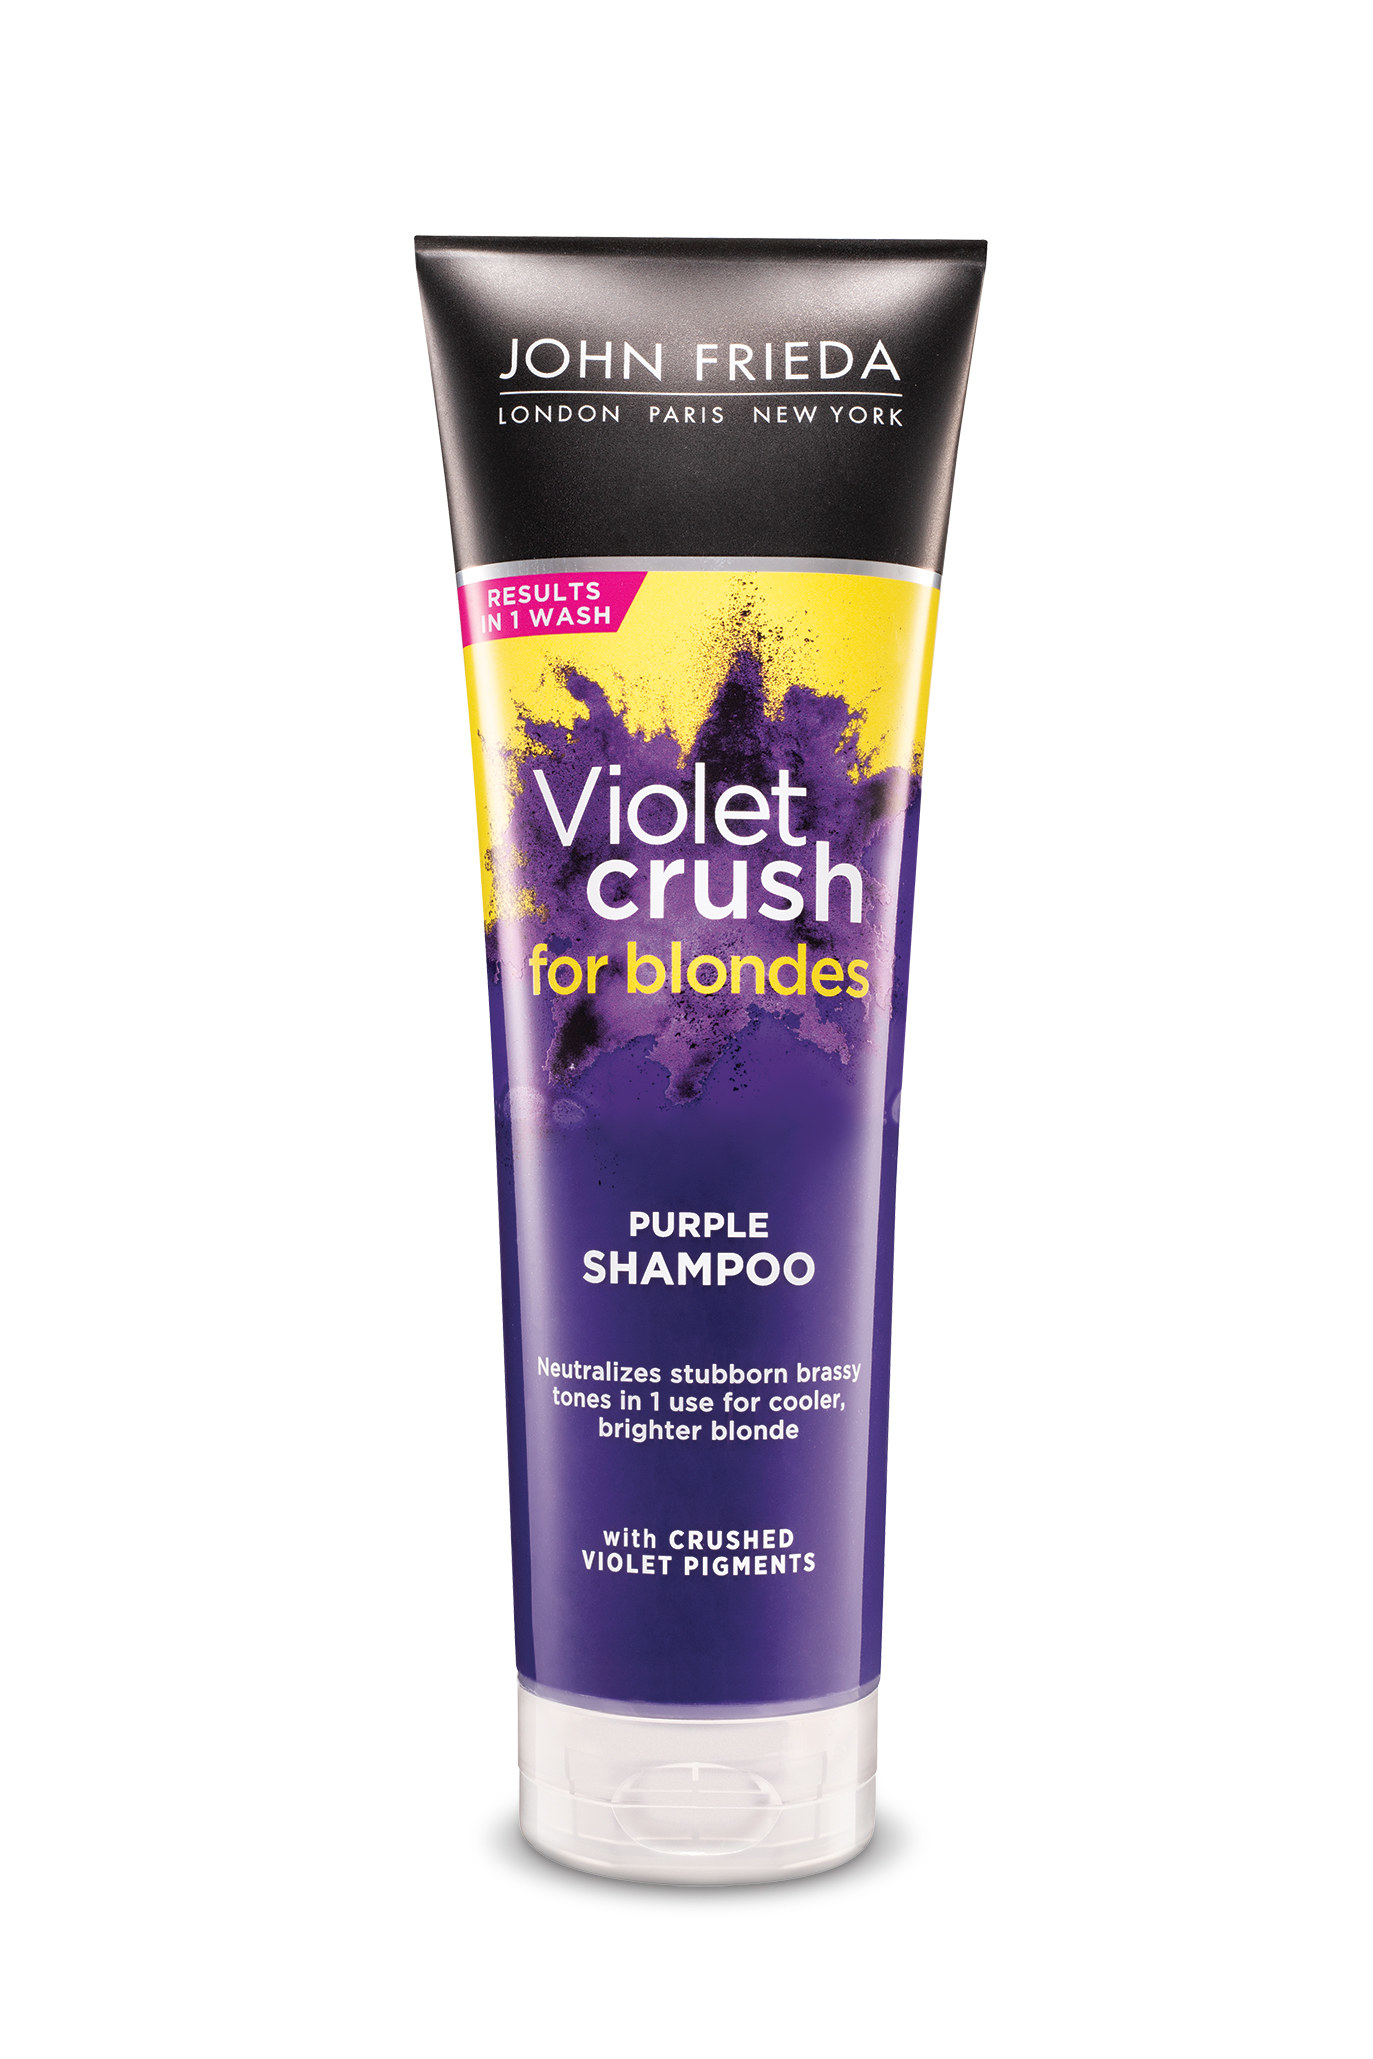 A bottle of the Violet Crush shampoo